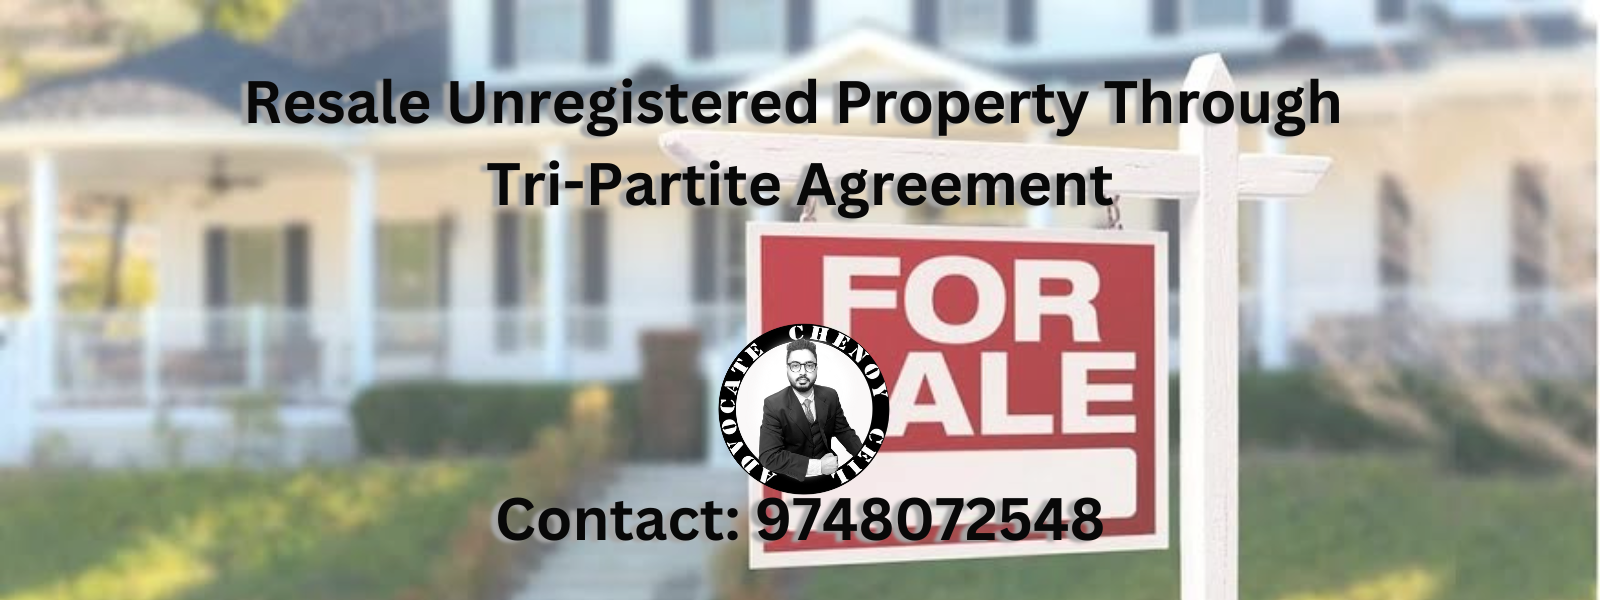 Resale unregistered property or apartment